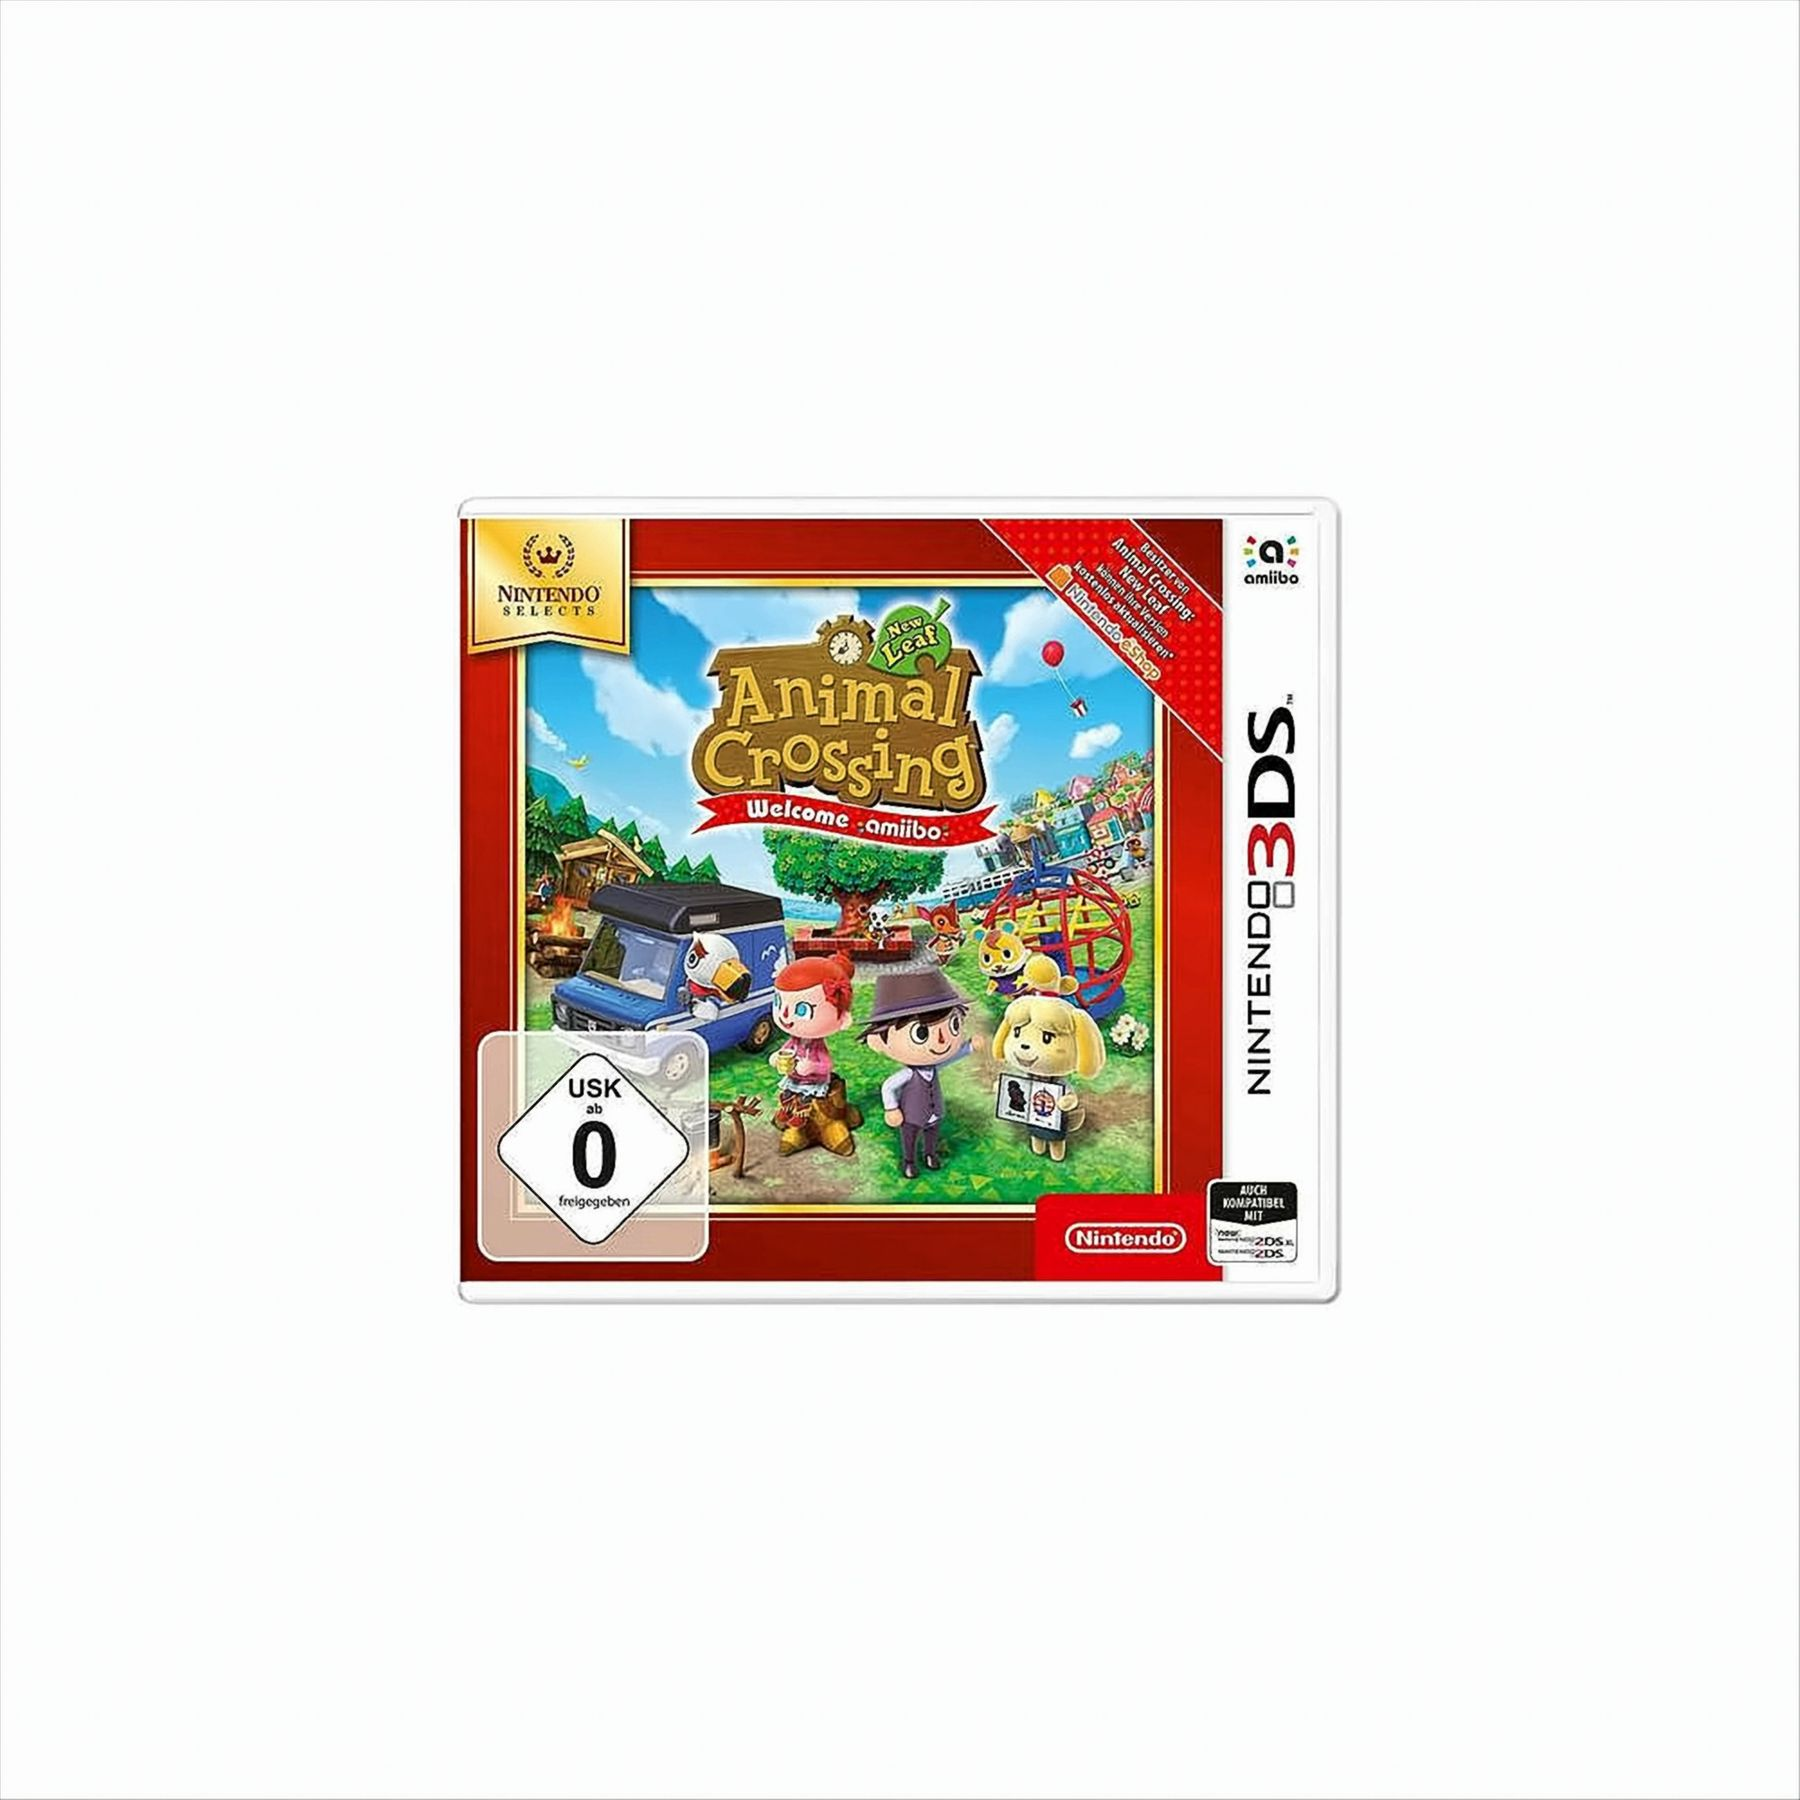 Crossing SELECTS [Nintendo Leaf Welcome Animal 3DS] Amiibo New 3DS -